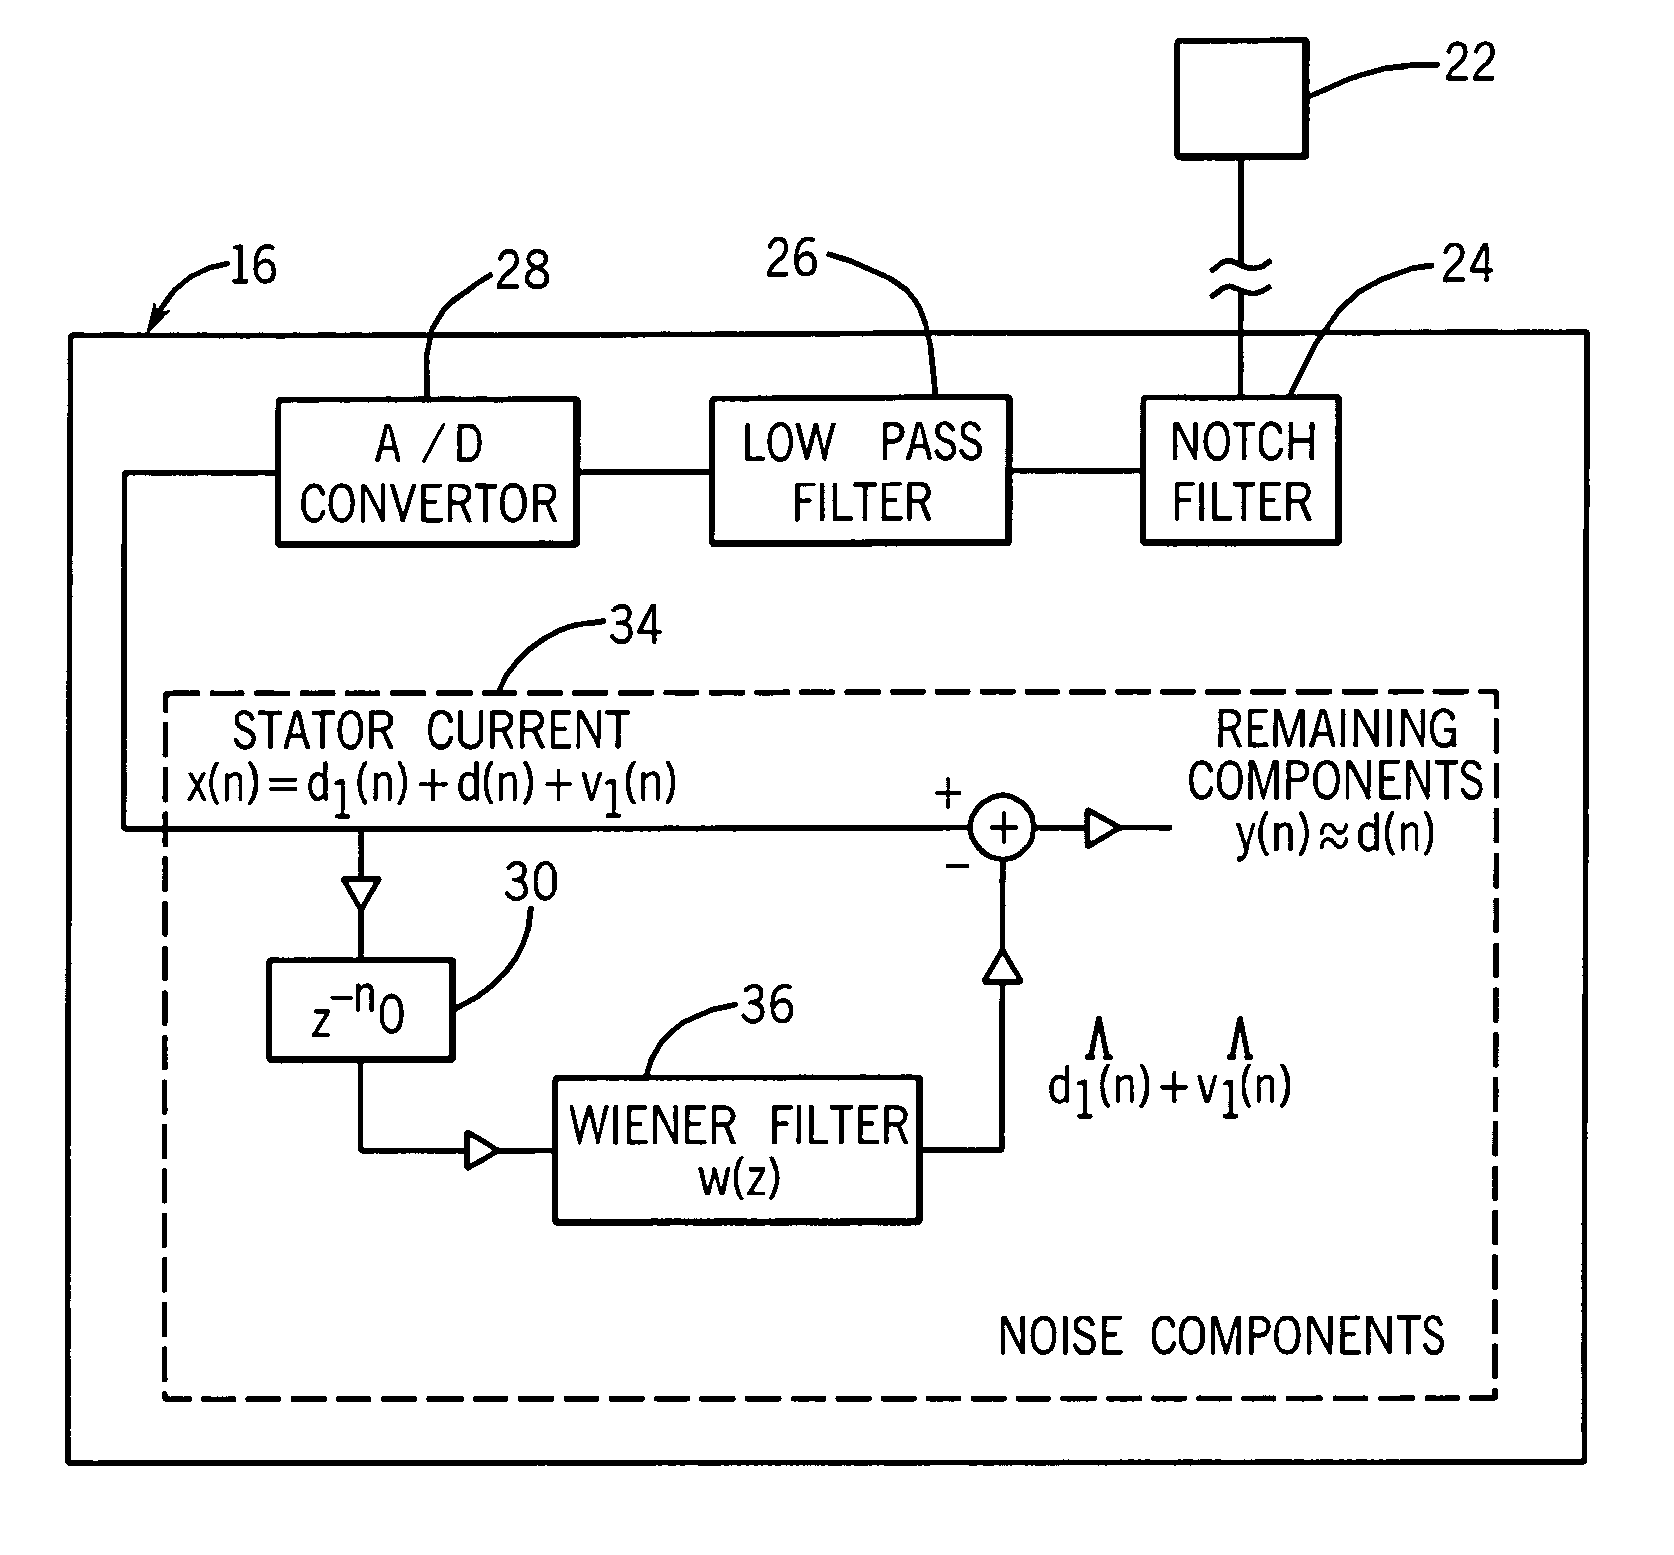 System and method for bearing fault detection using stator current noise cancellation